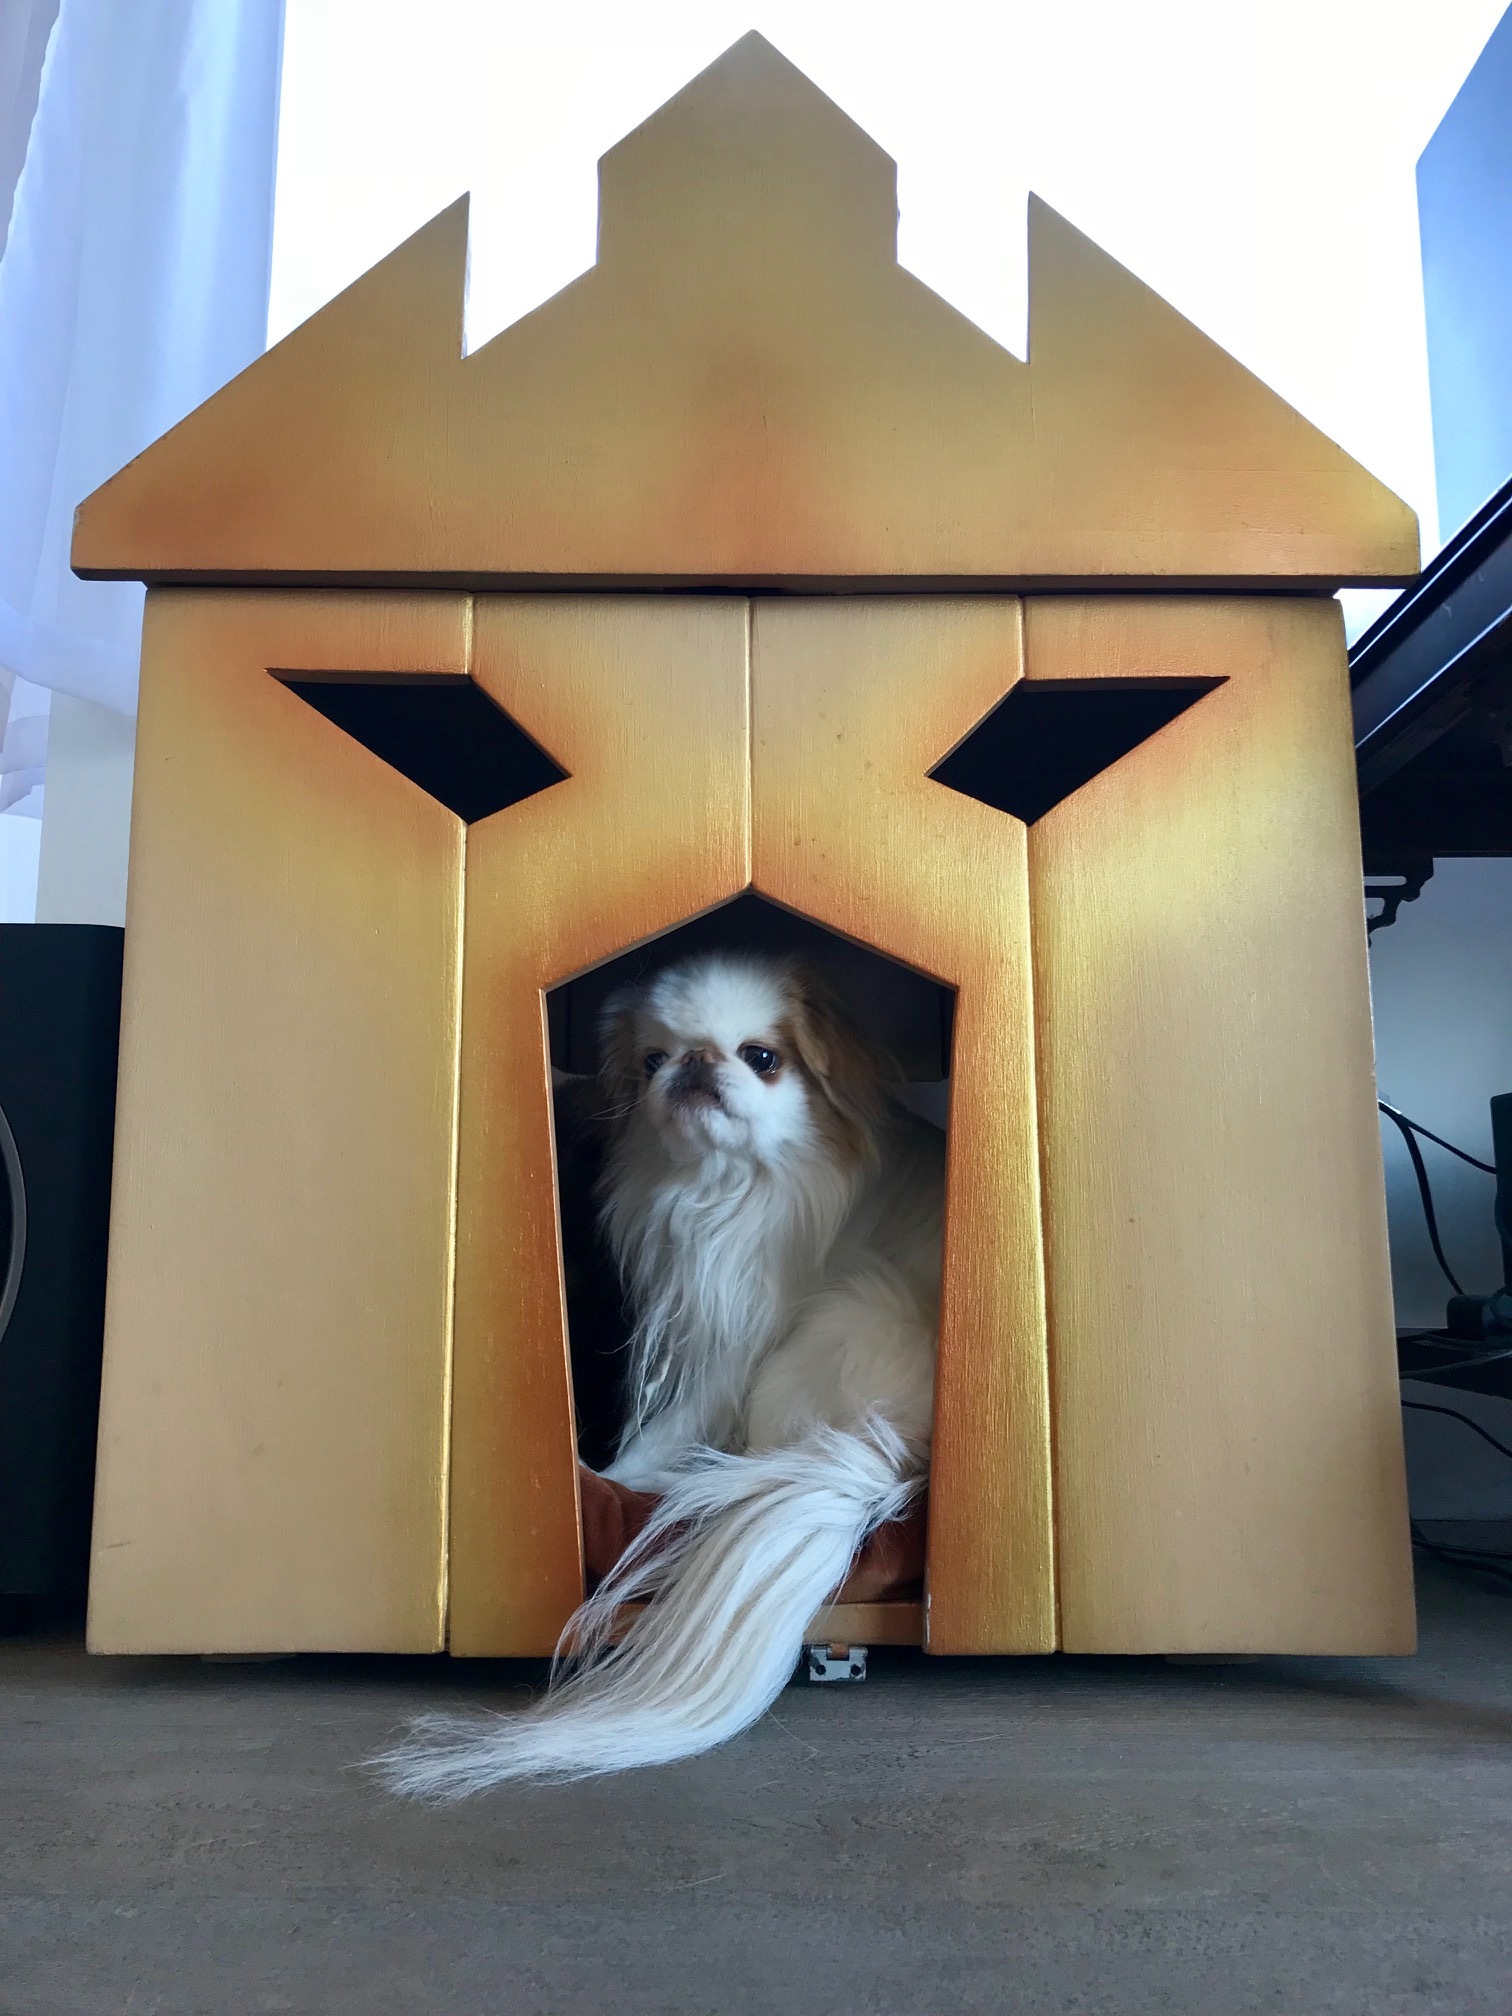 Michelle built this dog house for her dog.